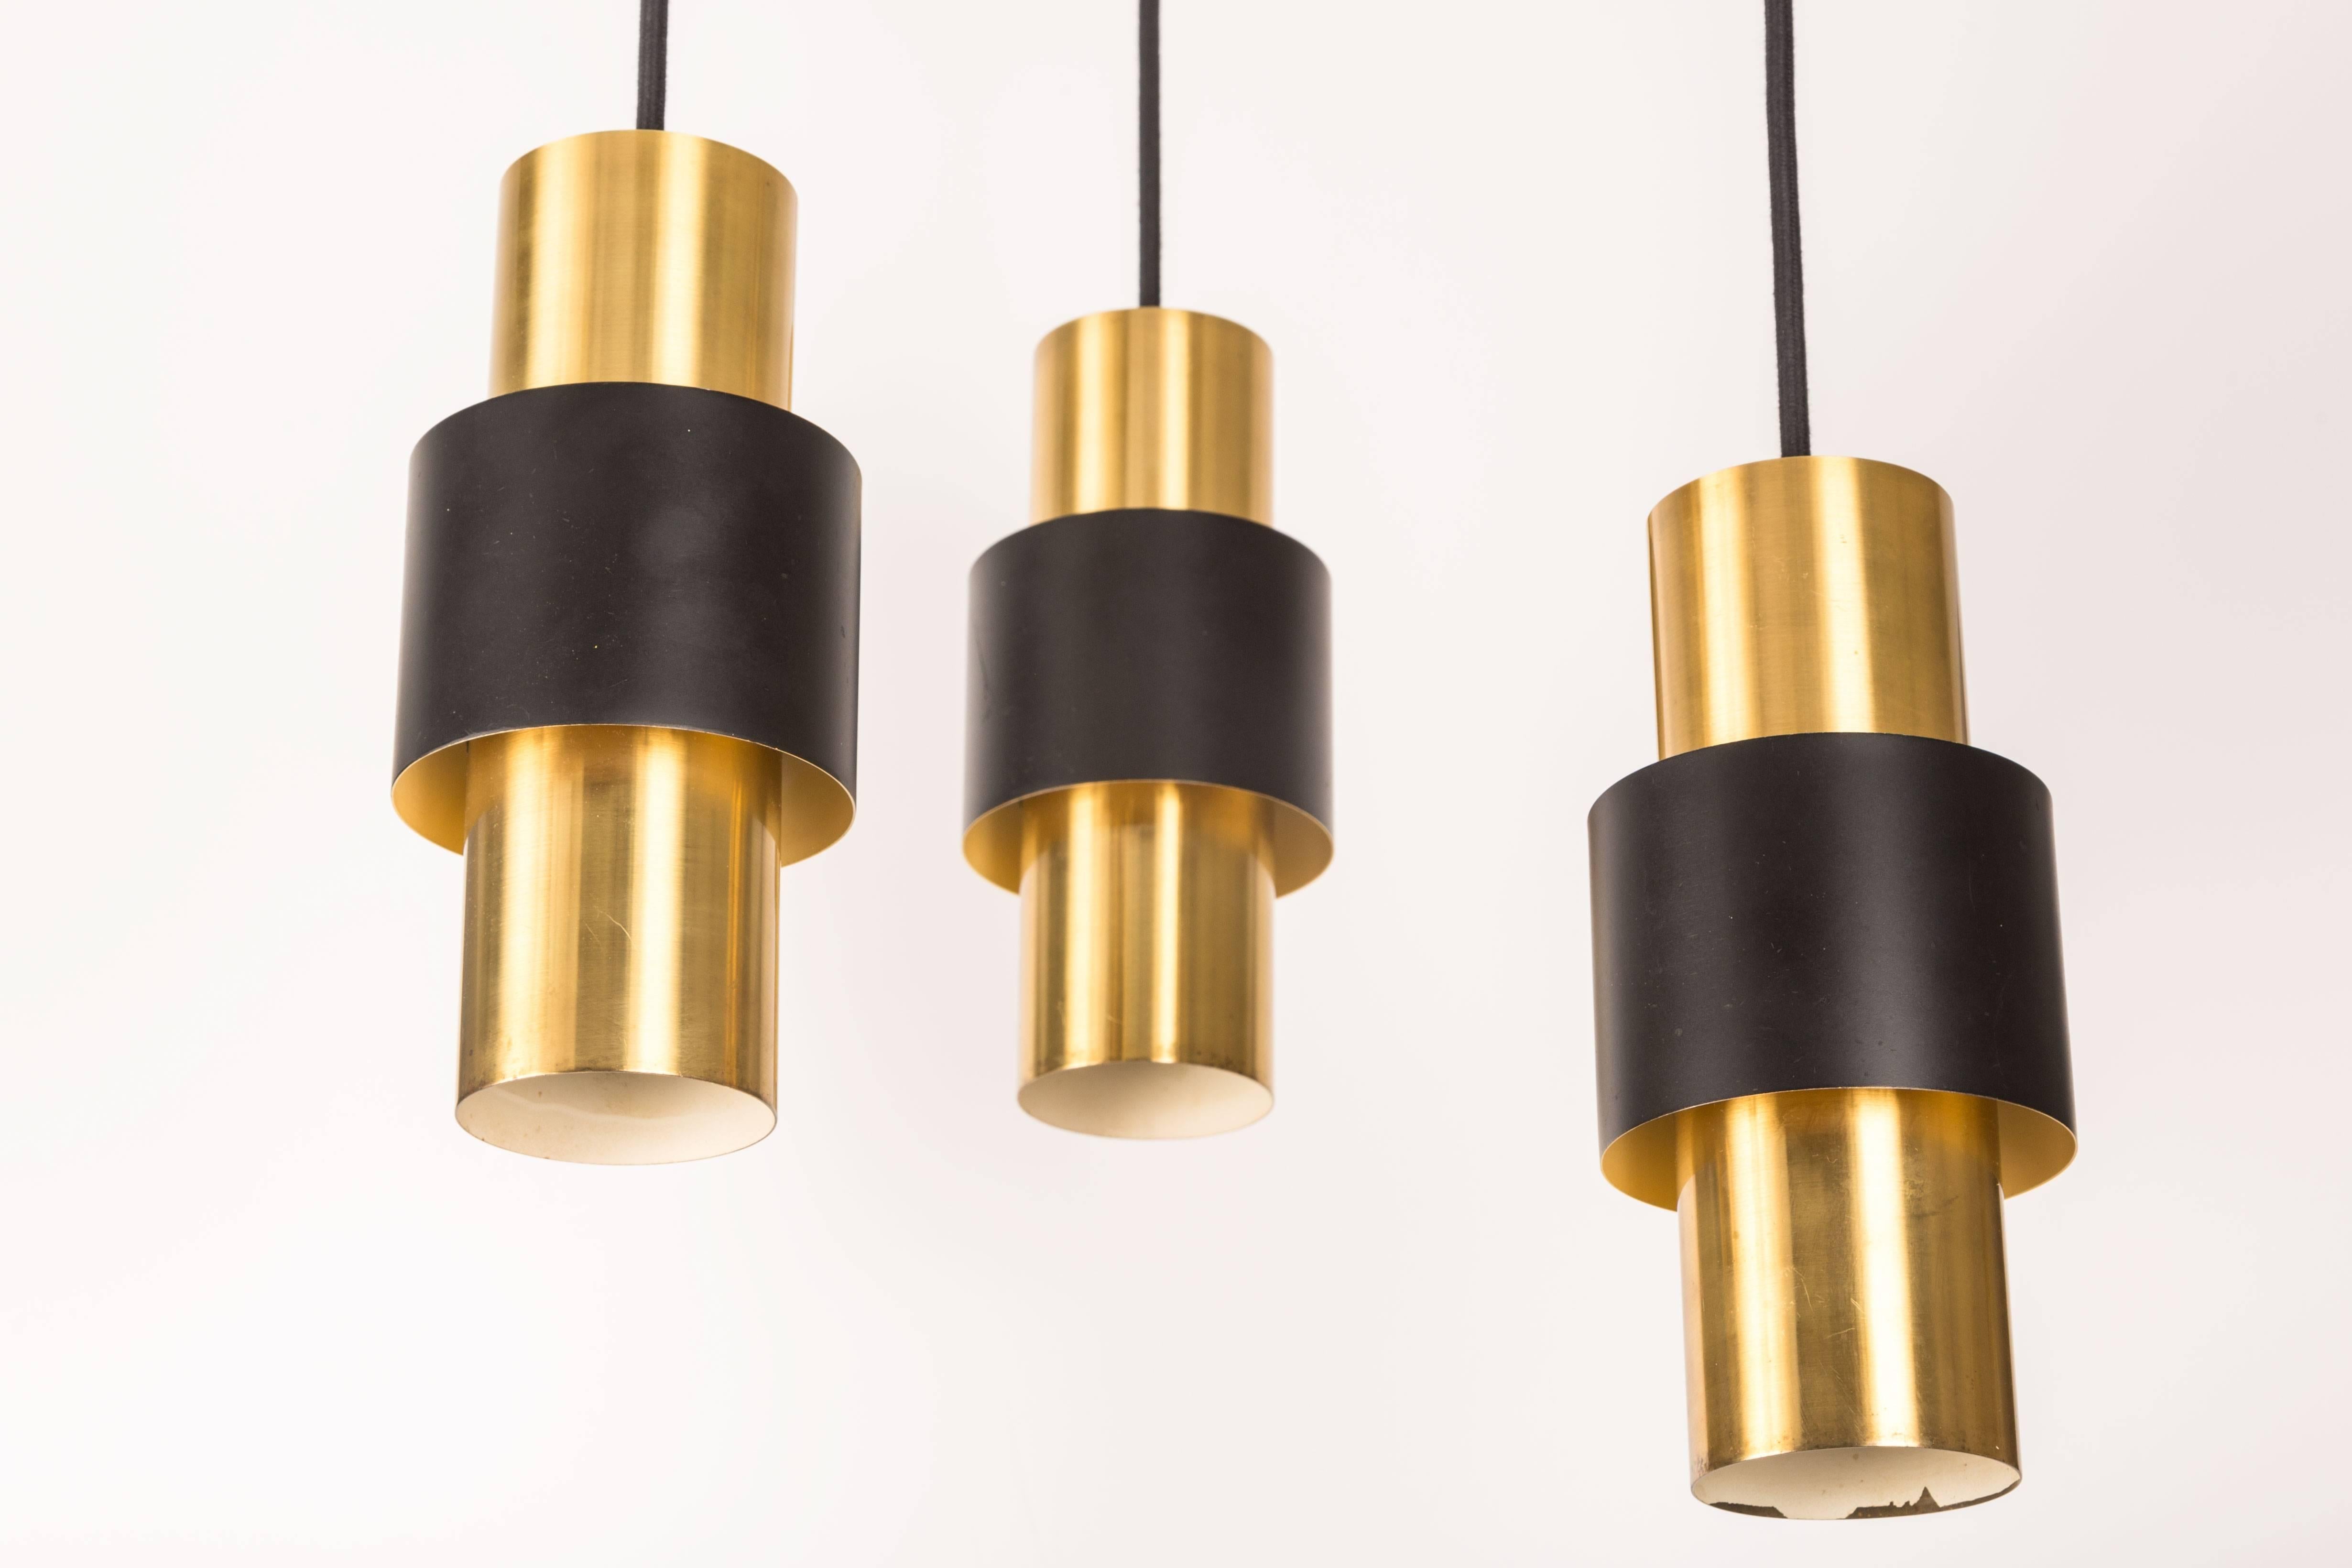 1950s Jo Hammerborg Pendants for Fog & Morup executed in brass and black enameled metal.

Price is for the set of 3. 